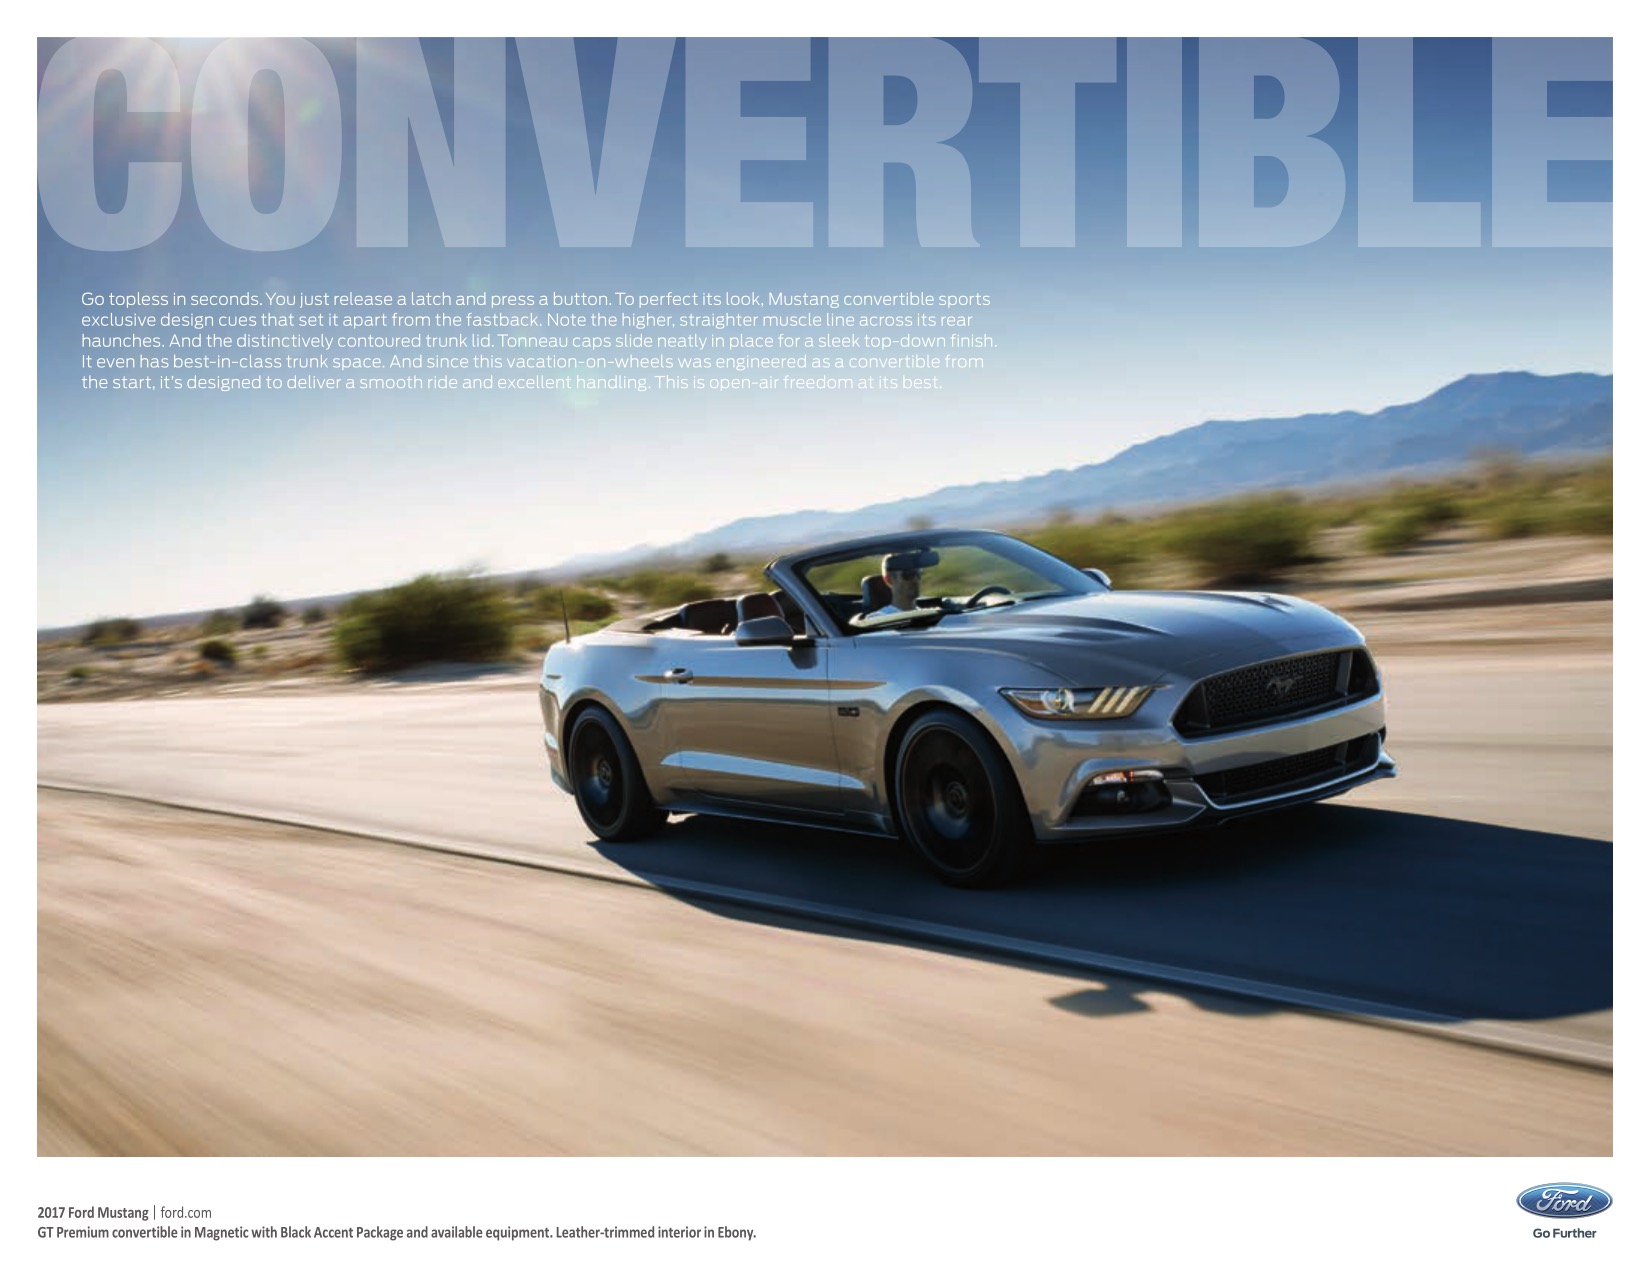 2017 Ford Mustang Brochure Page 4